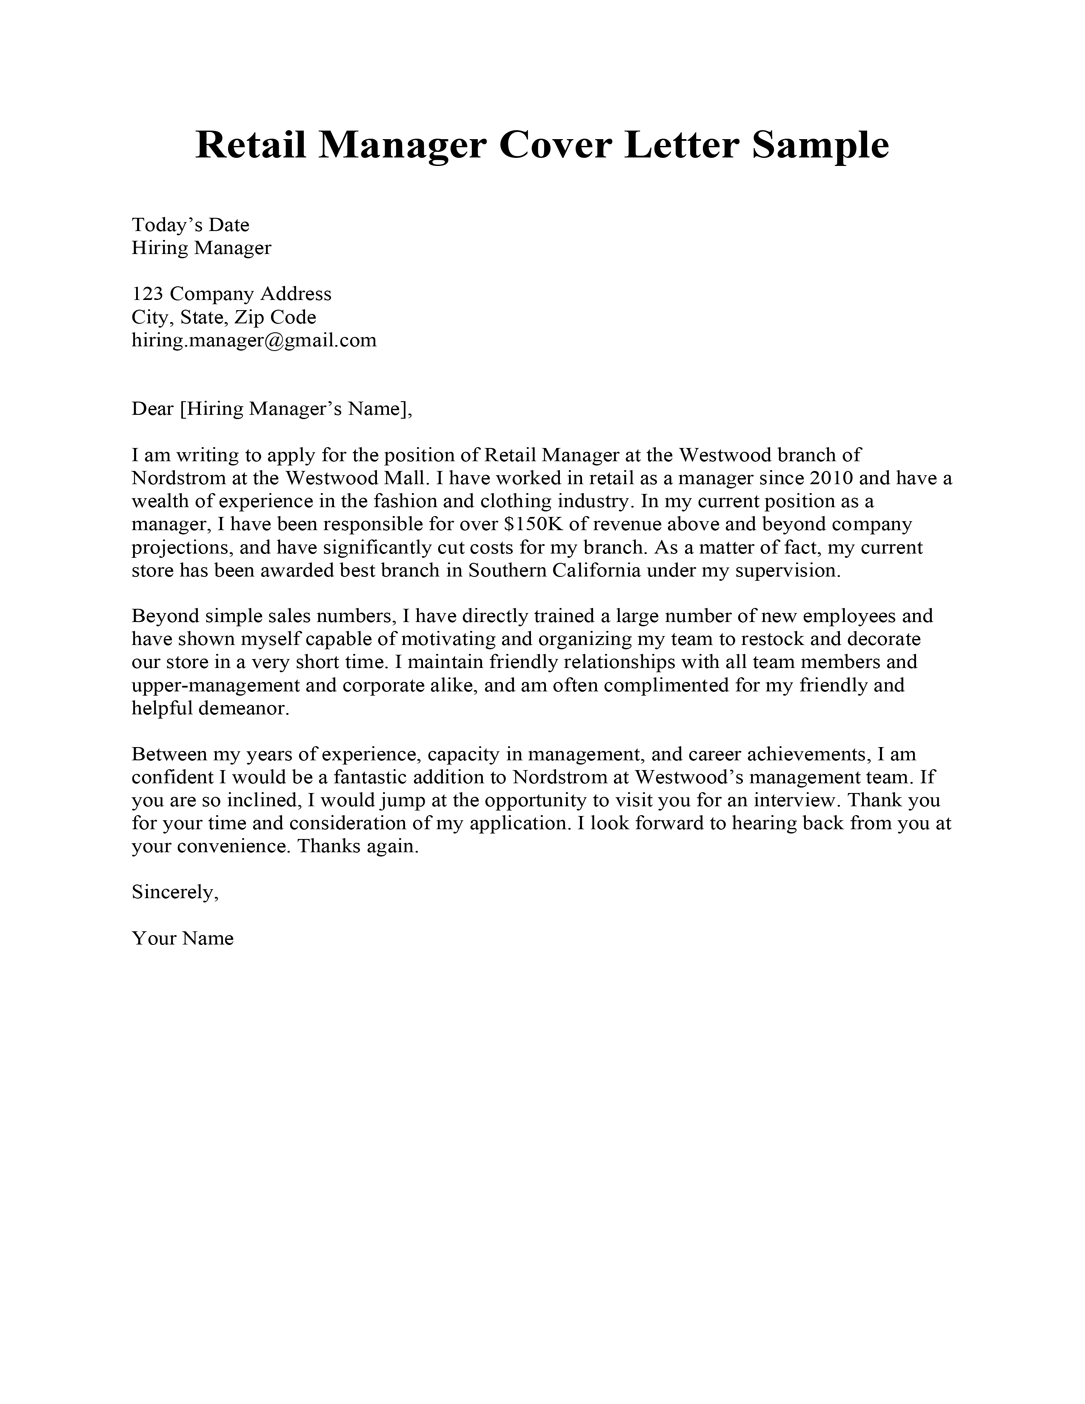 Retail Customer Service Cover Letter from resumecompanion.com